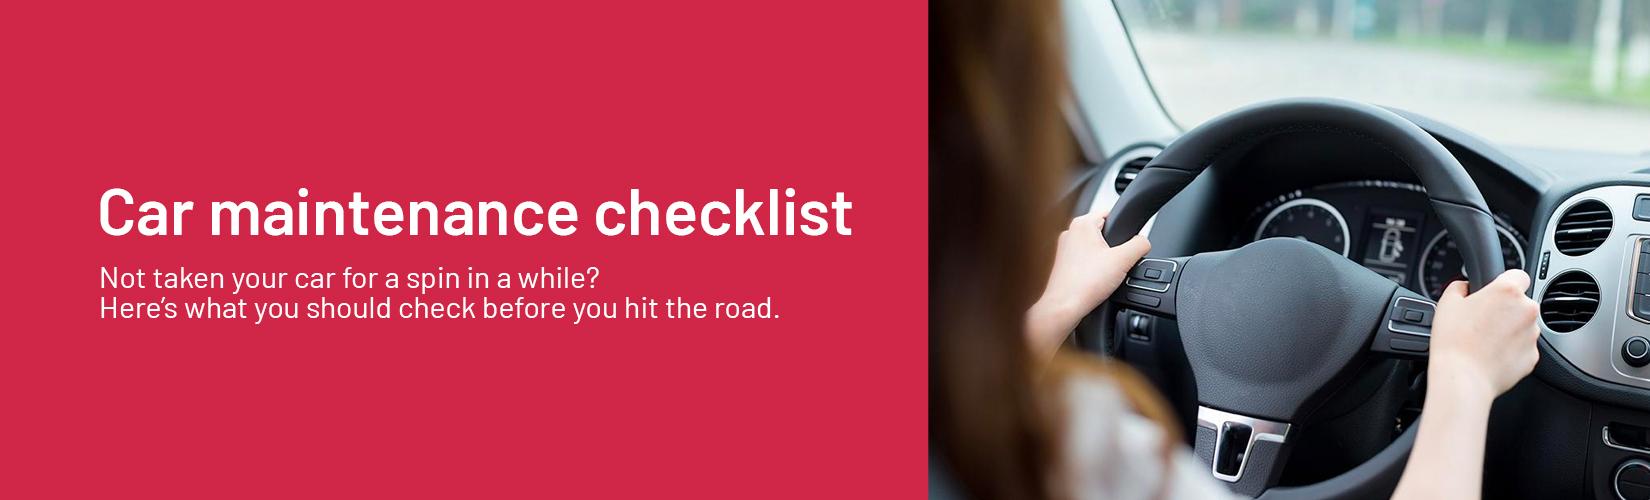 Car maintenance checklist. Not taken your car for a spin in a while? Here’s what you should check before you hit the road.